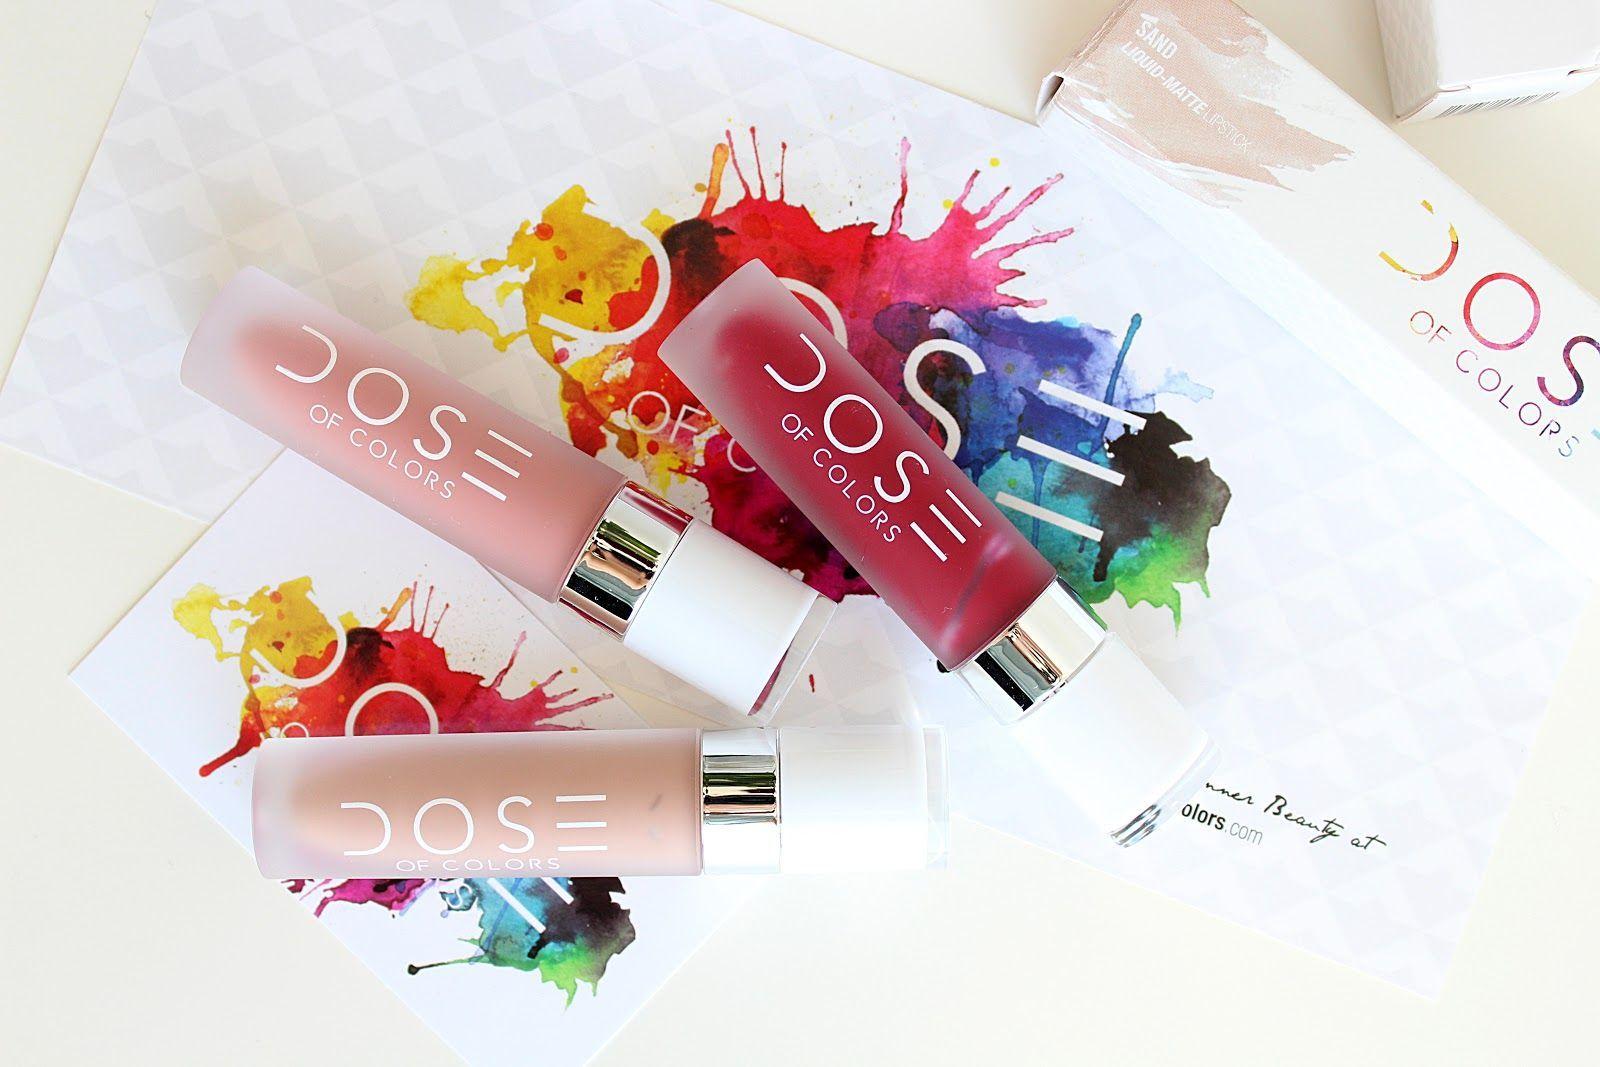 Dose of Color Logo - Dose Of Colors Liquid Lipstick Review and Swatches. Life in Excess